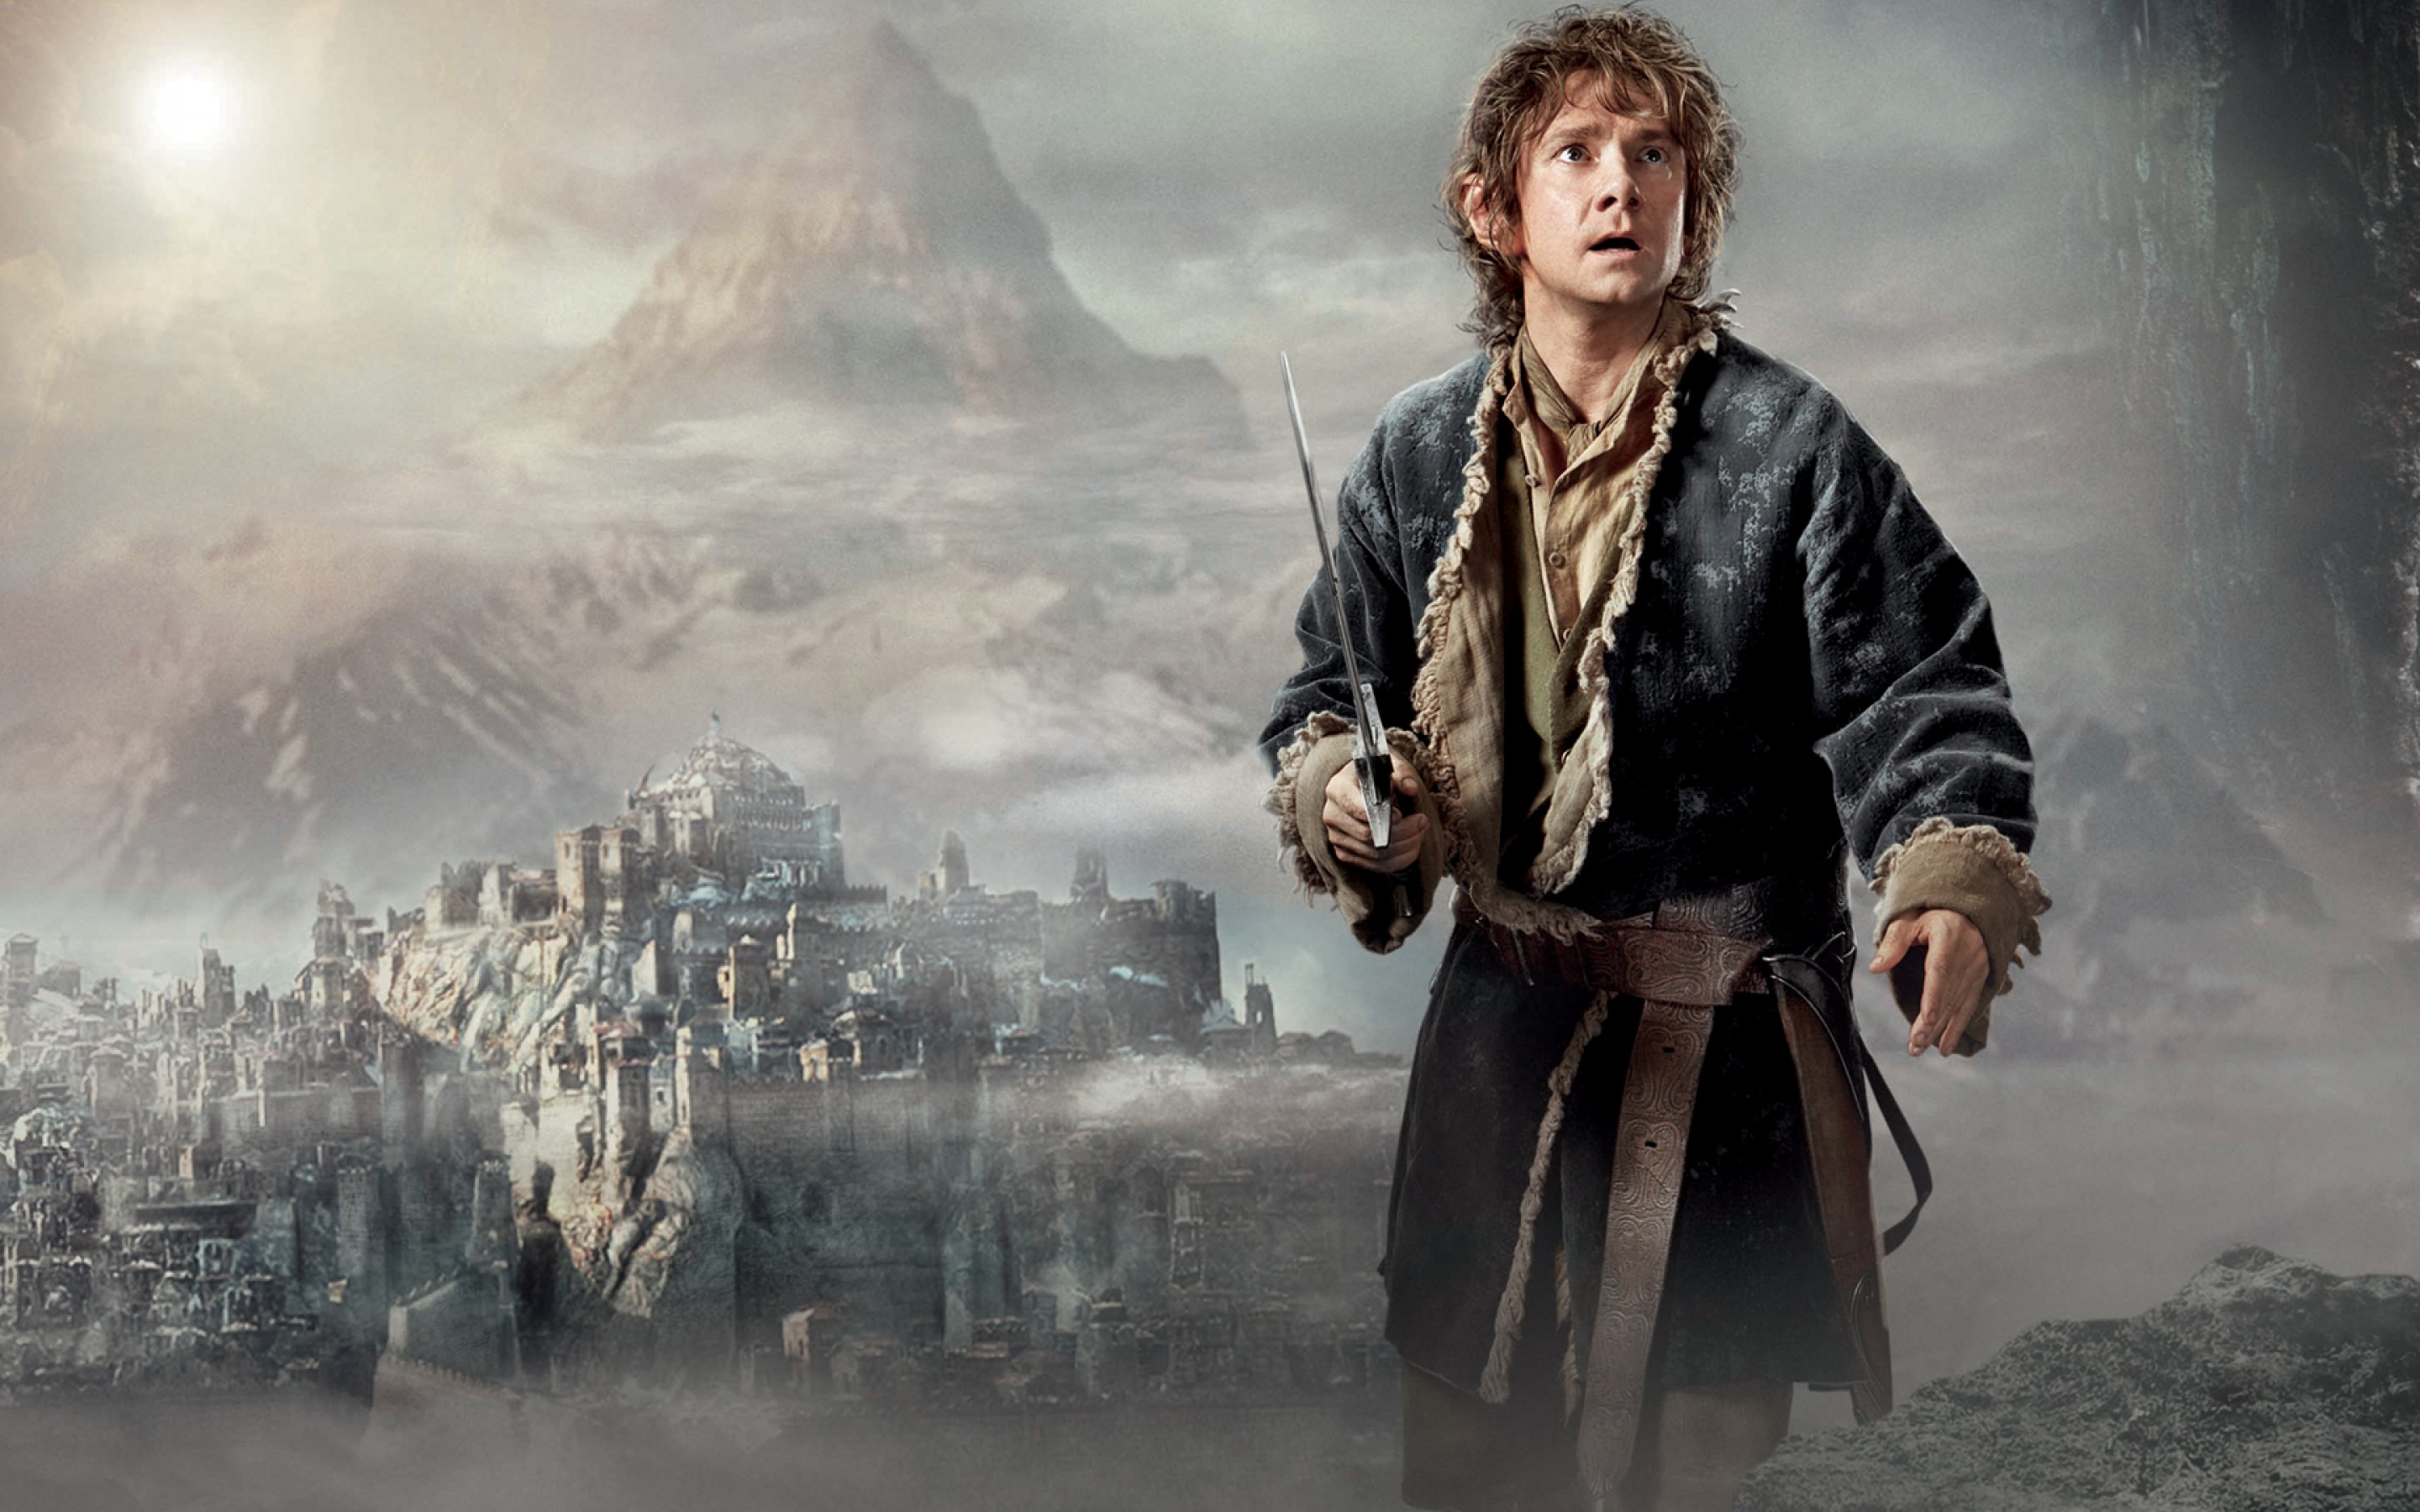 for mac download The Hobbit: The Desolation of Smaug